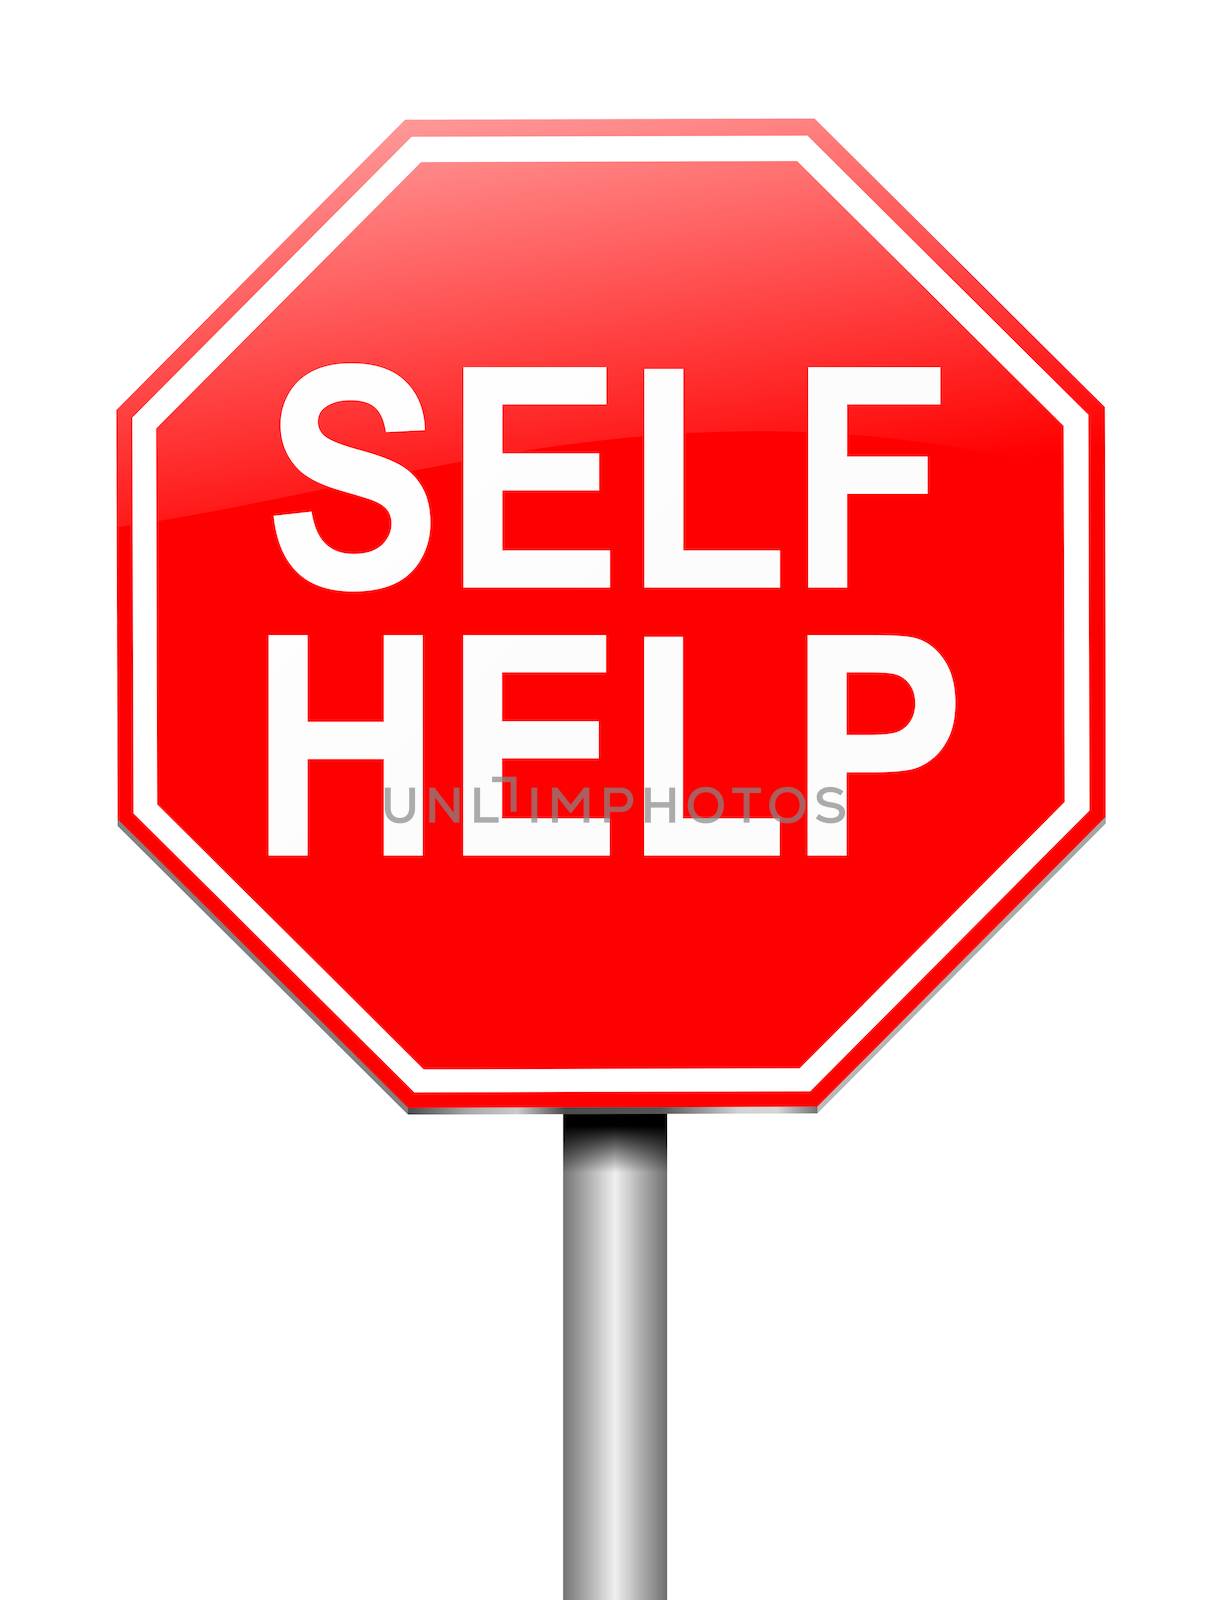 Illustration depicting a sign with a self help concept.